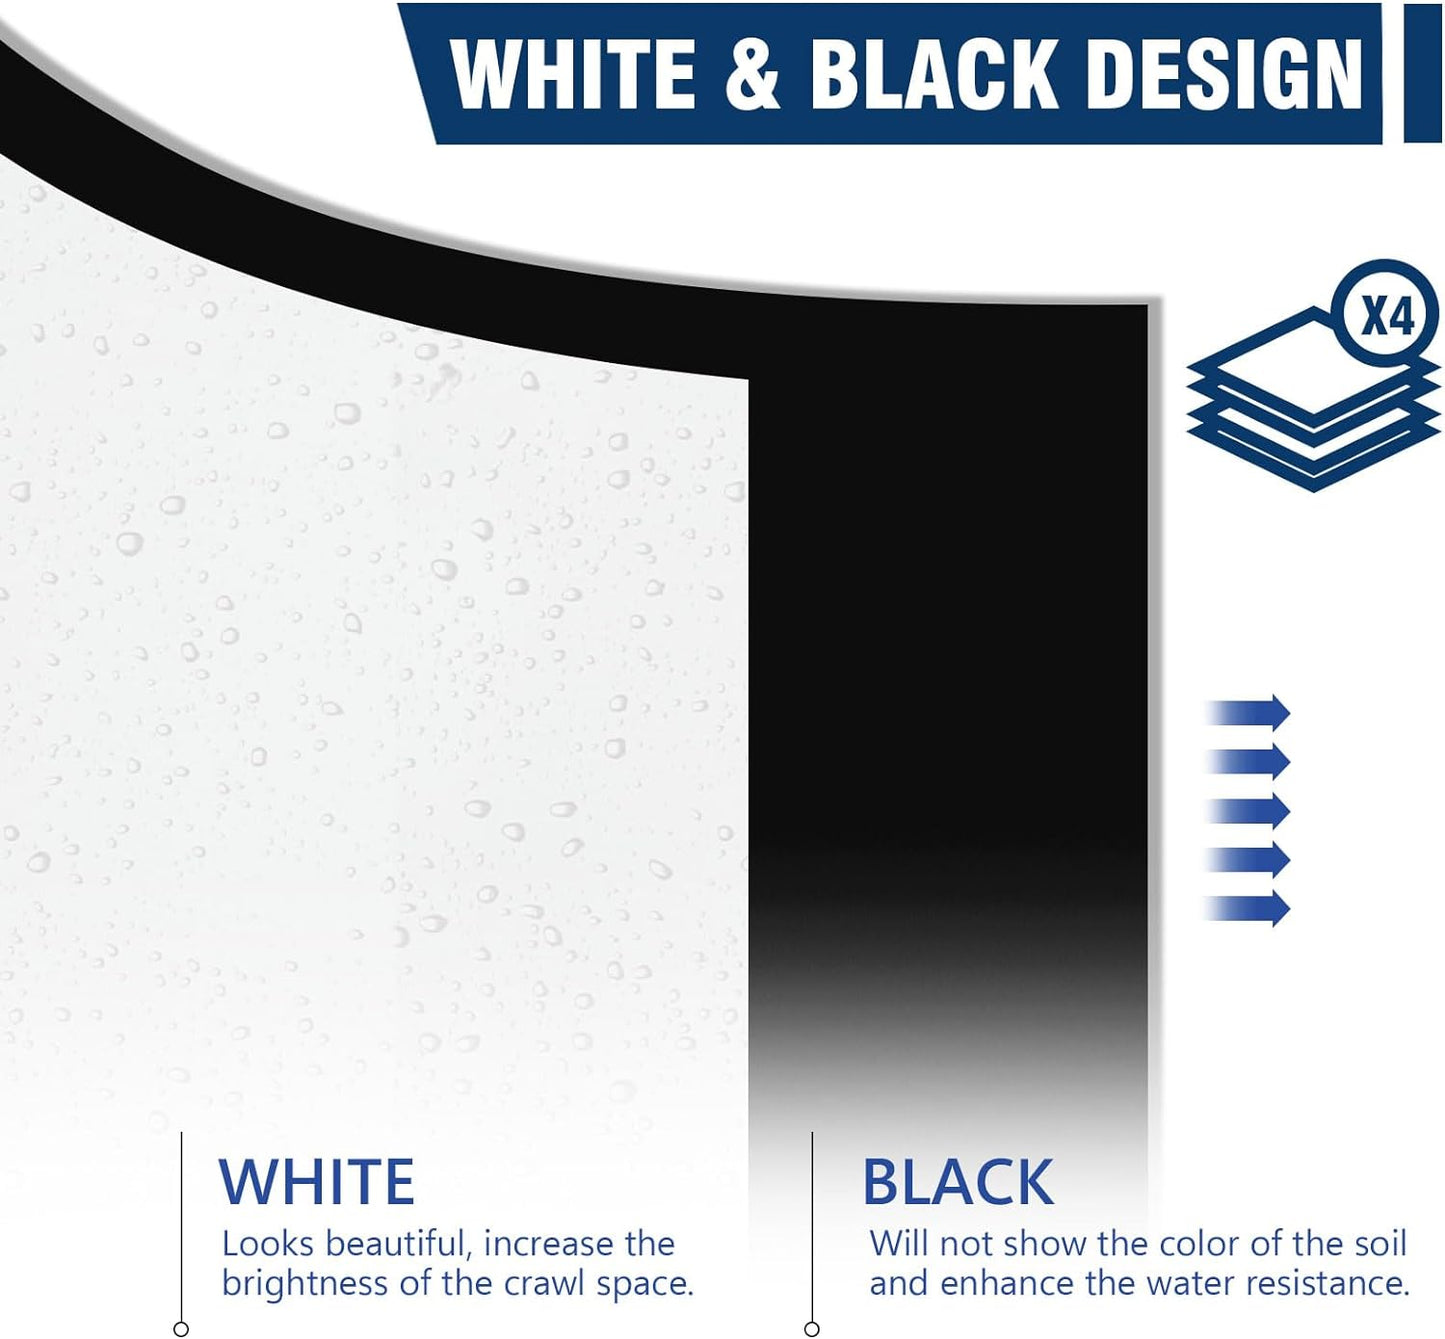 Vapor barrier available in white and black